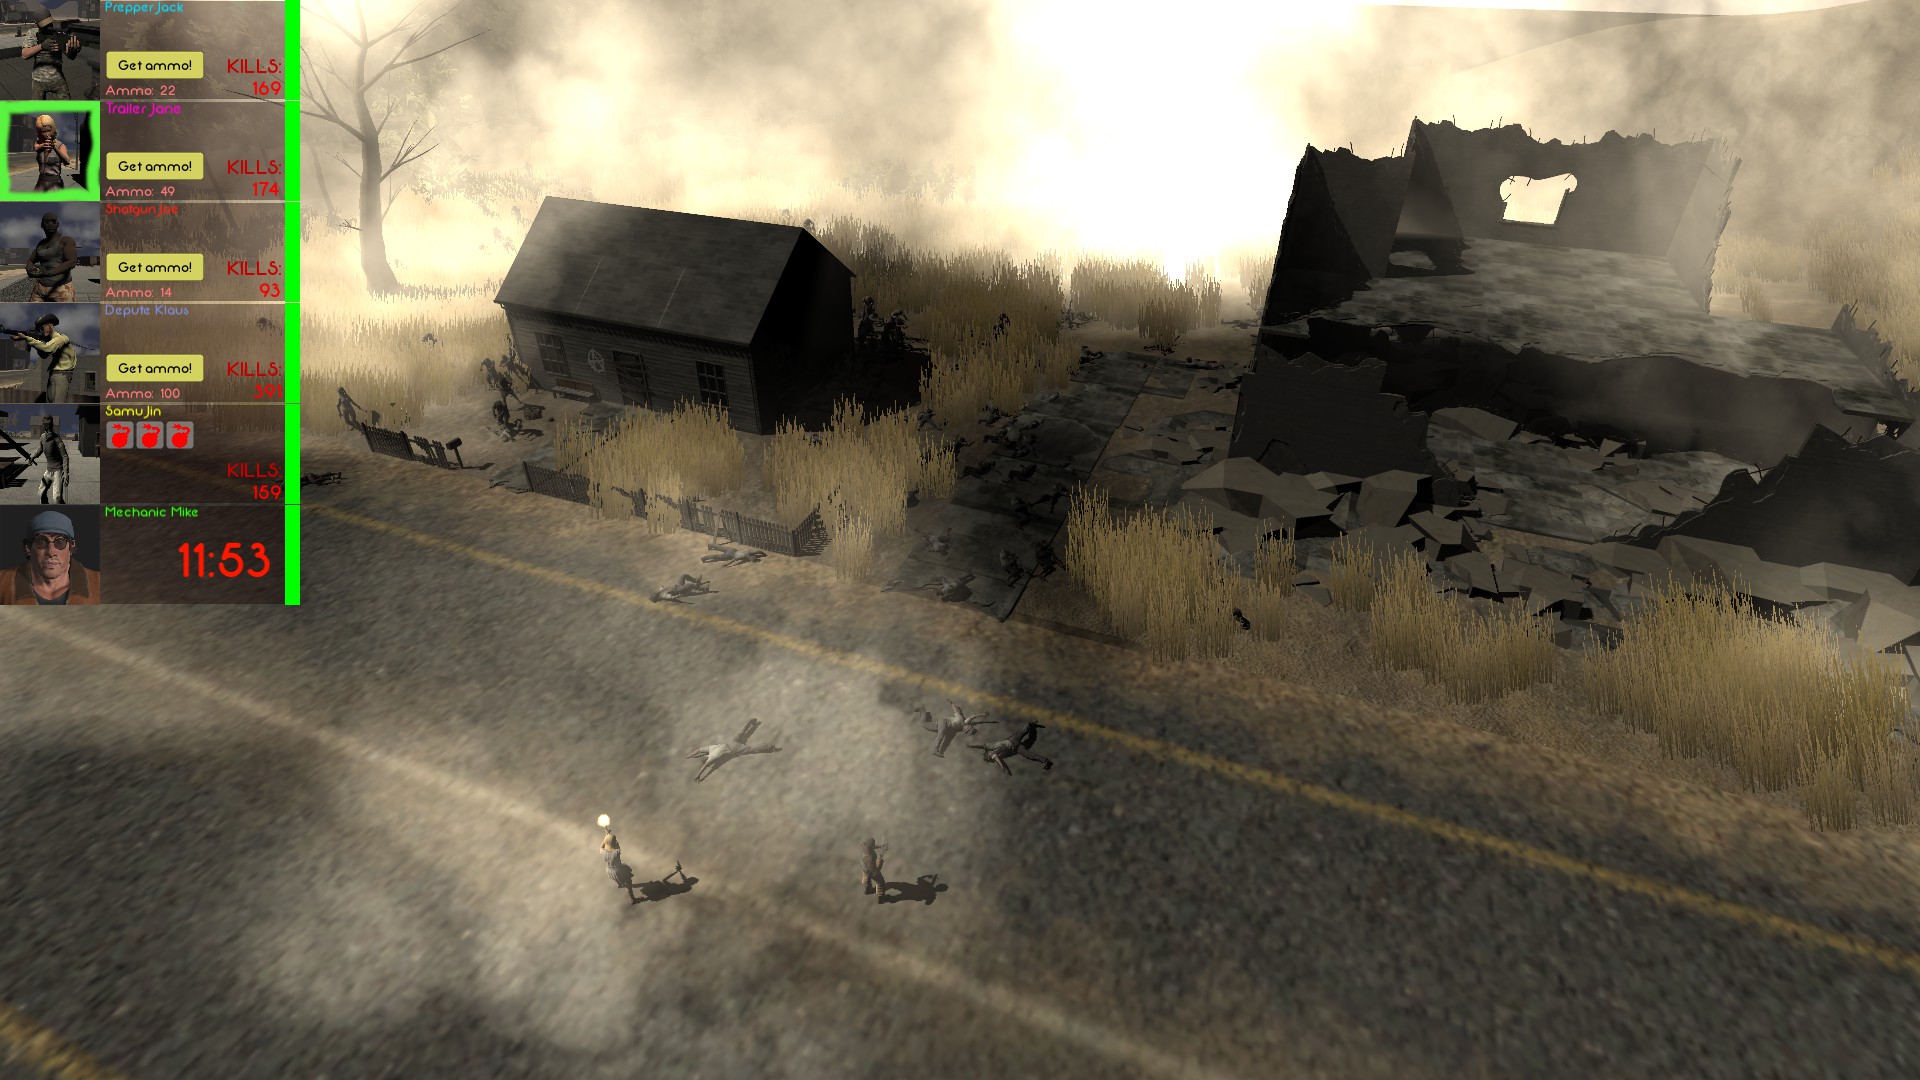 Fatal Hour: Petroleum Free Download for PC